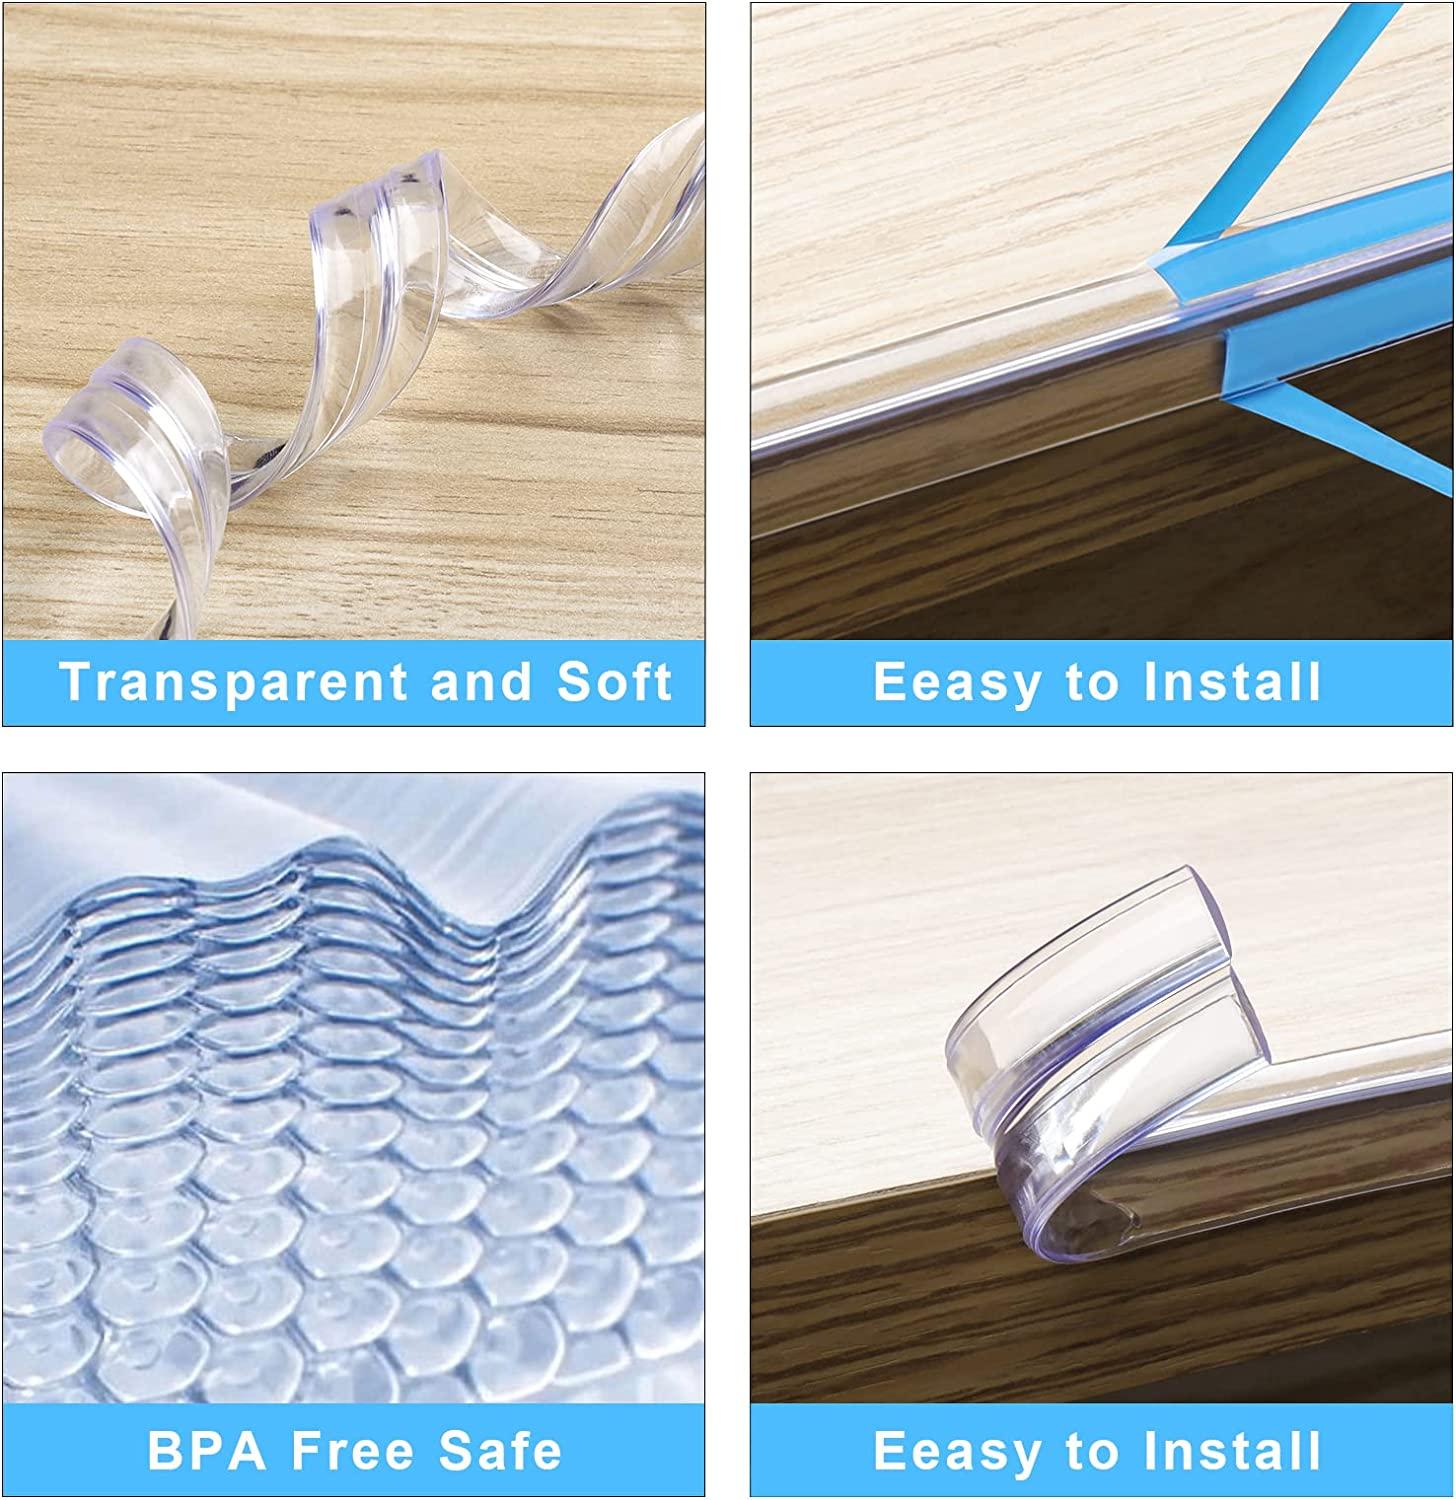 Baby Proofing, Edge Protector Strip Clear, Silicone Soft Corner Protectors  with Upgraded Pre-Taped Strong Adhesive, 6.6ft(2M) Edge Protectors for  Sharp Corners of Cabinets, Tables, Drawers 0.40.4in width(6.6ft length)